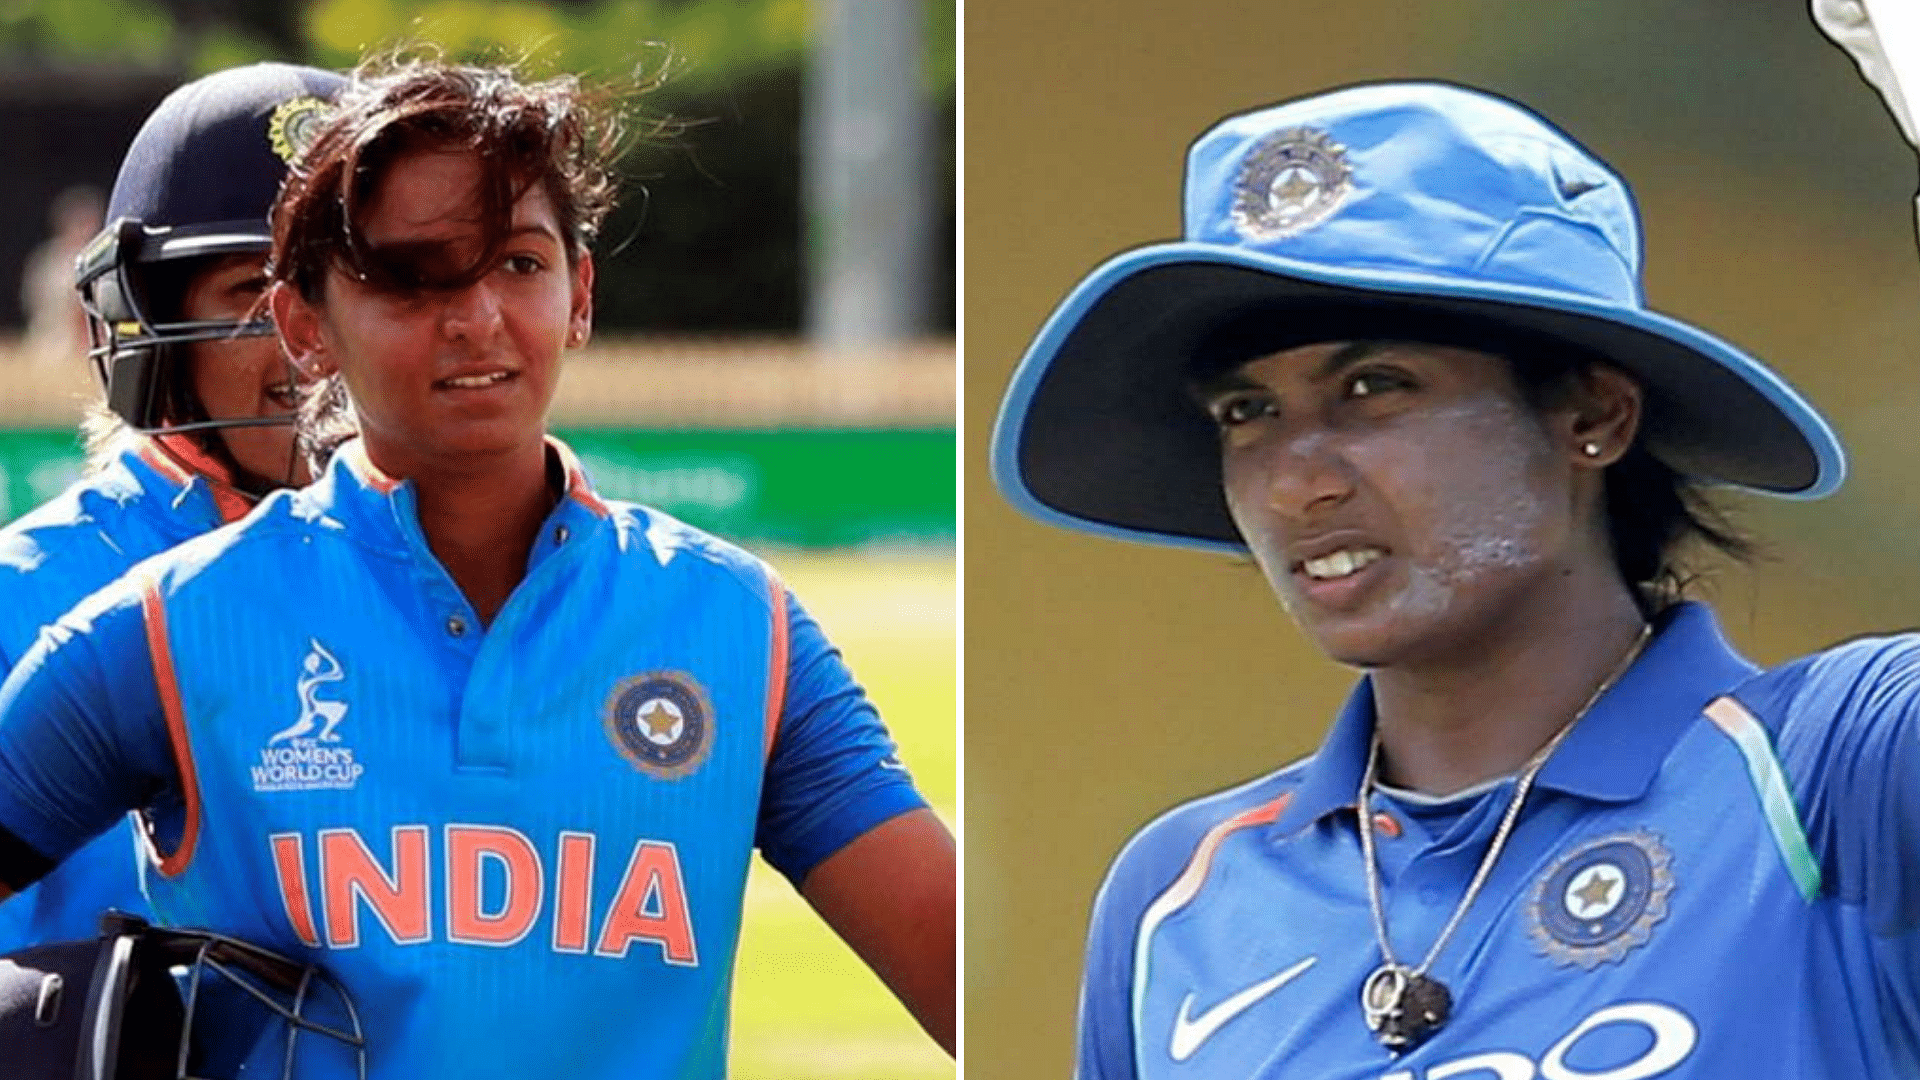 Harmanpreet Kaur defended the decision to leave a fit-again Mithali Raj out of the Indian line-up in the Women’s World T20 semi-final against England.